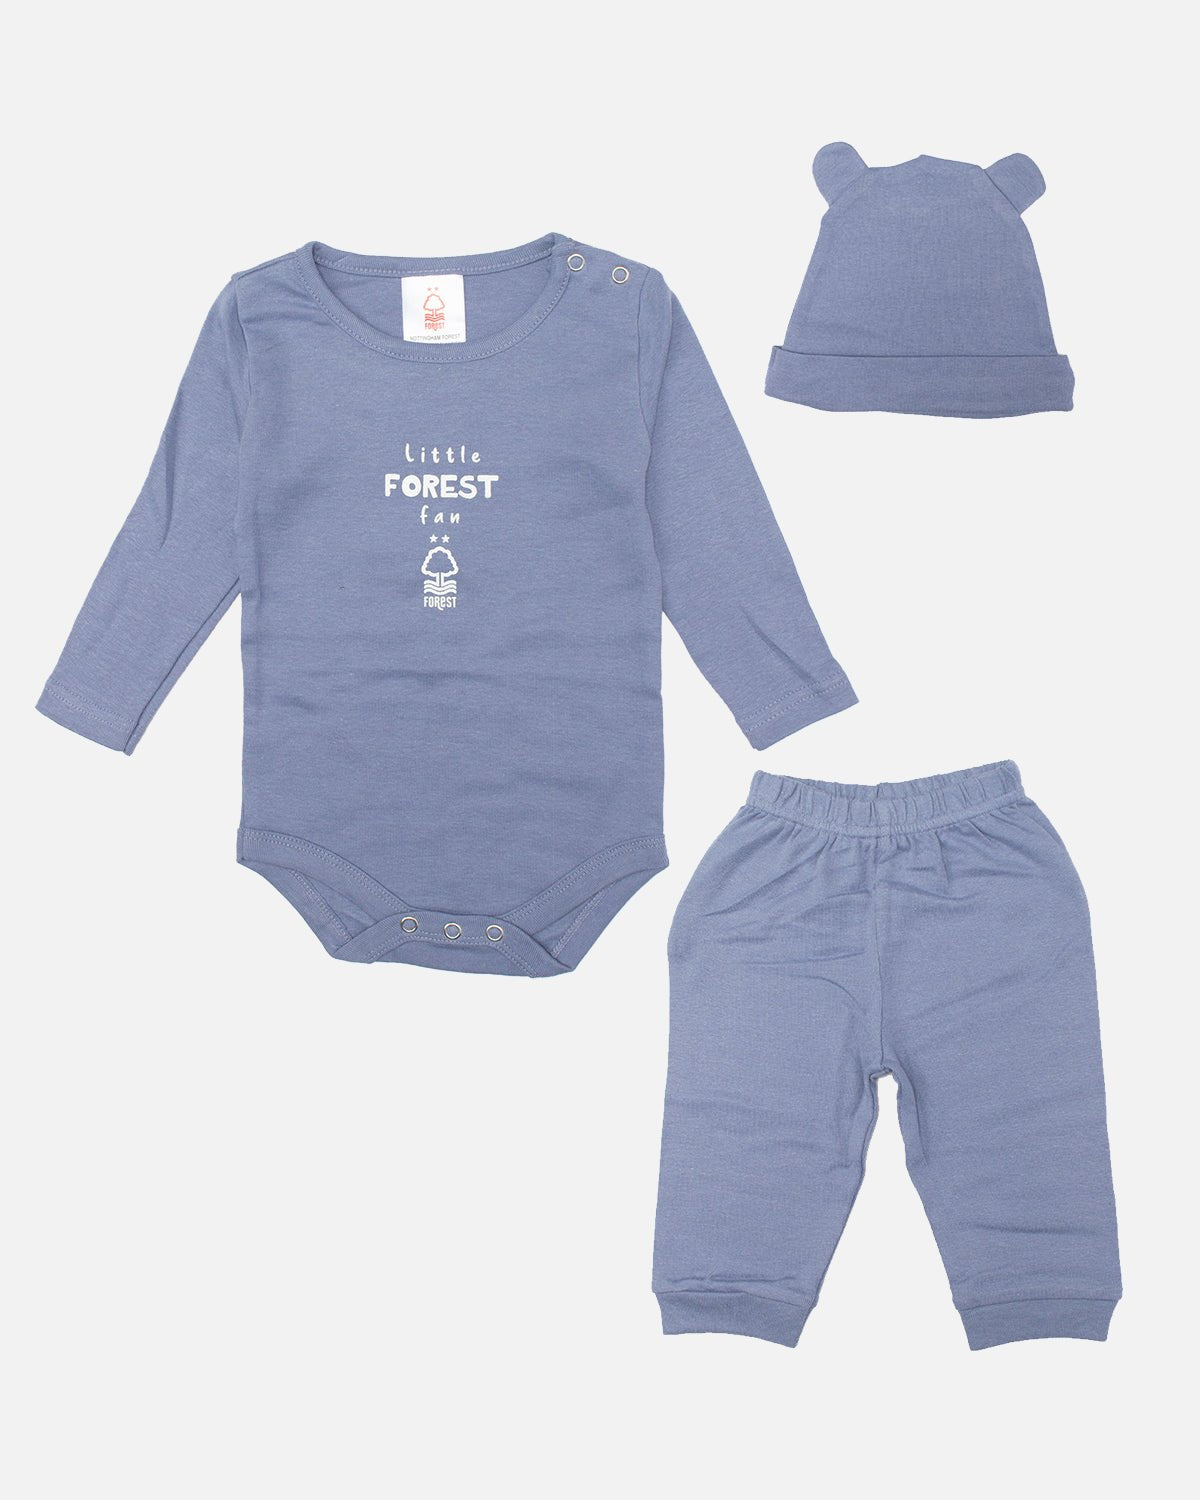 NFFC Kian Baby Ribbed Set - Nottingham Forest FC